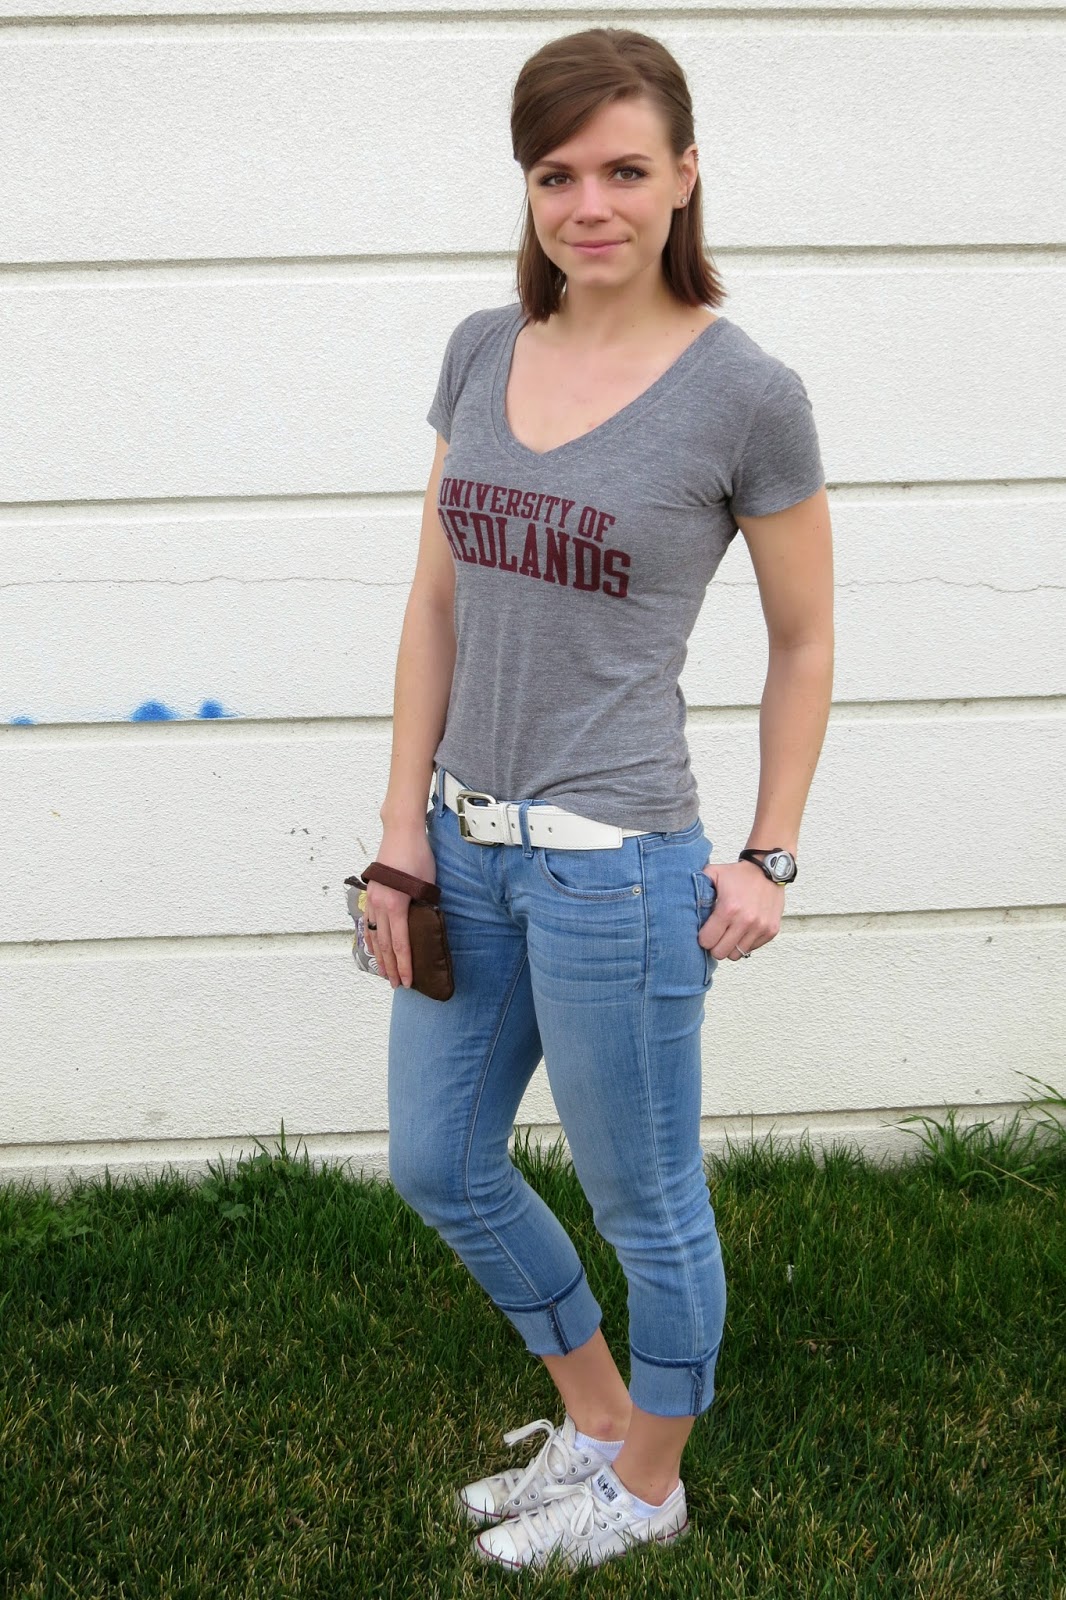 Sporty Casual, University of Redlands top